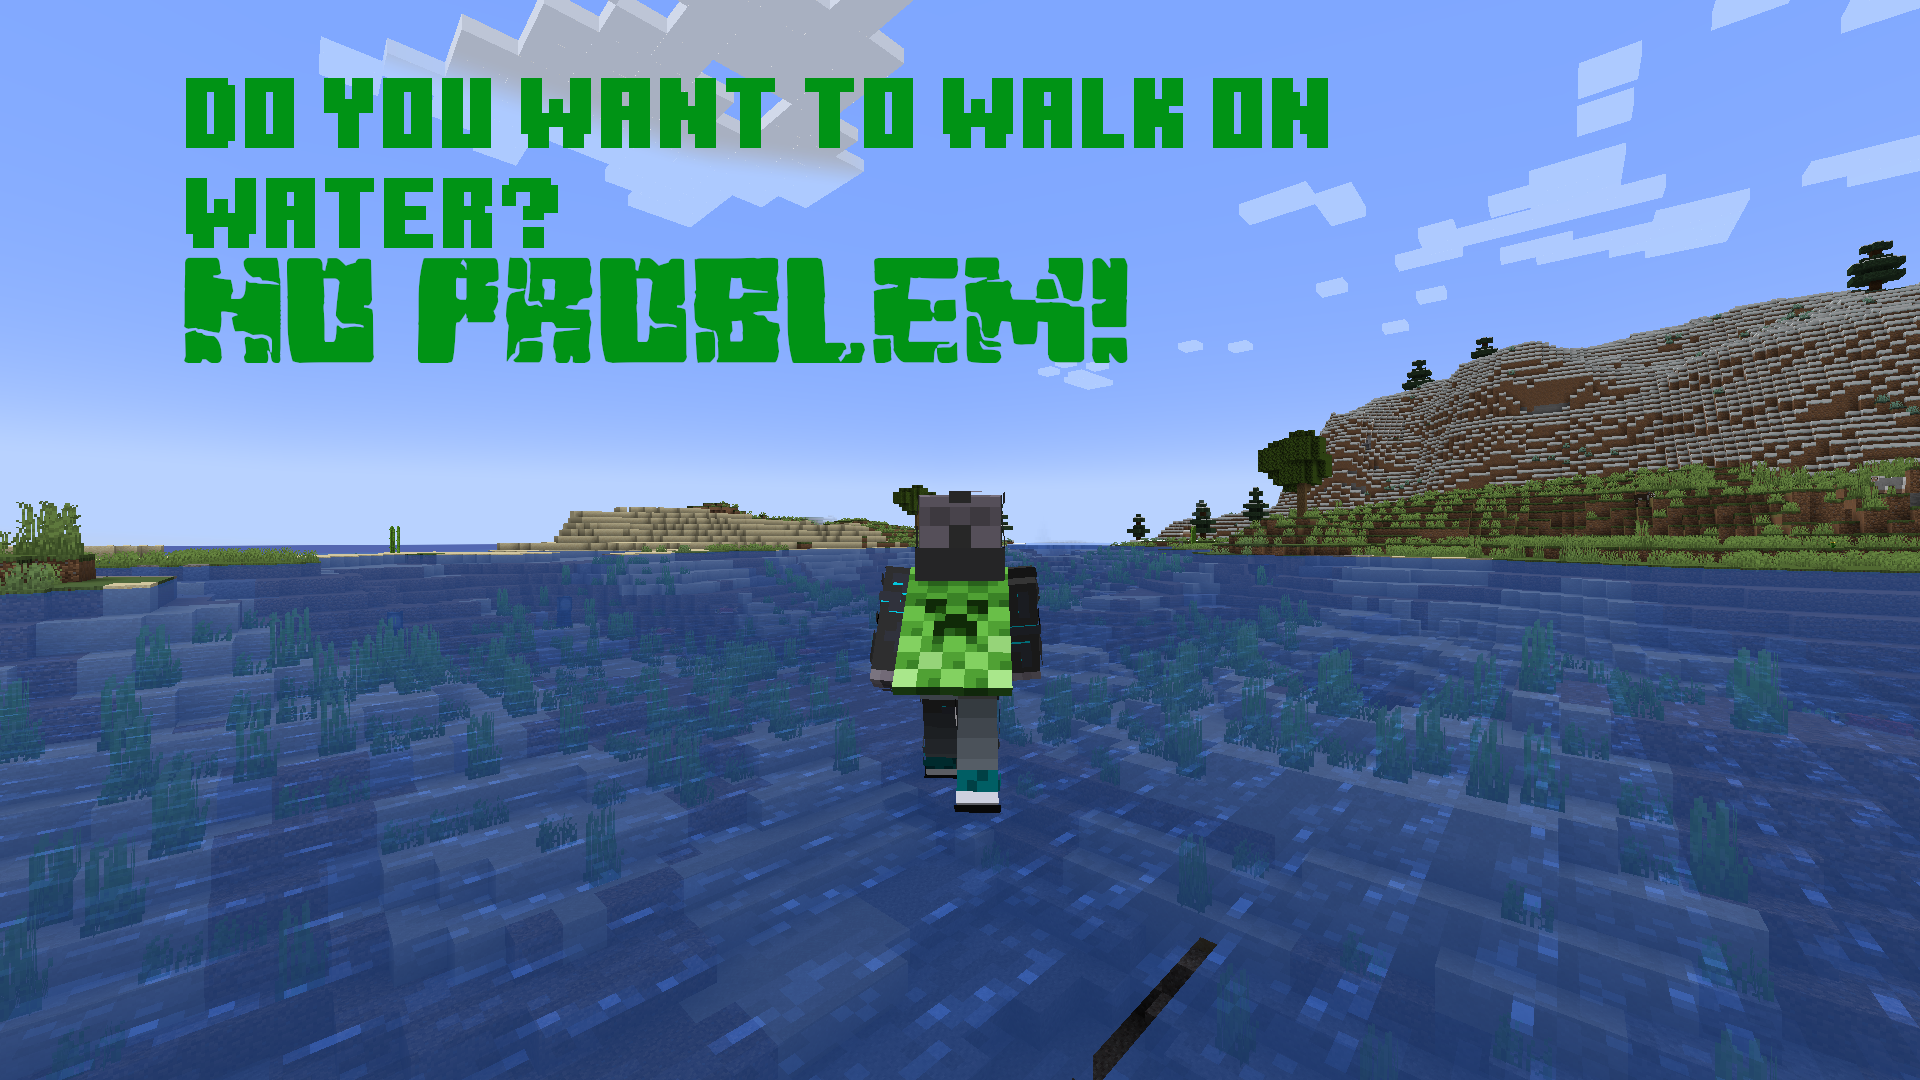 Do you want to walk on water? No problem!